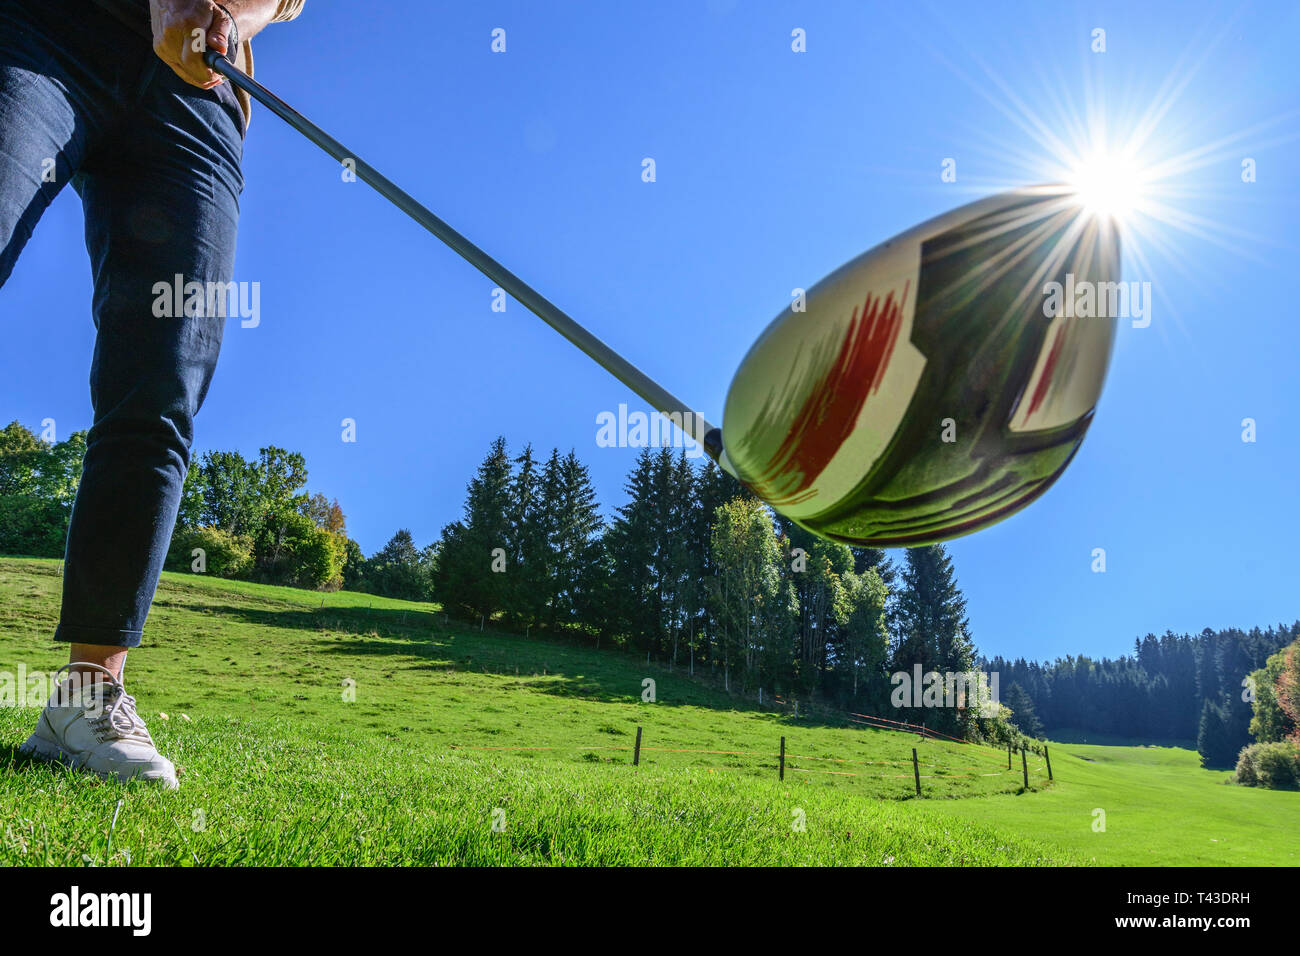 Golf player hitting a ball with driver Stock Photo